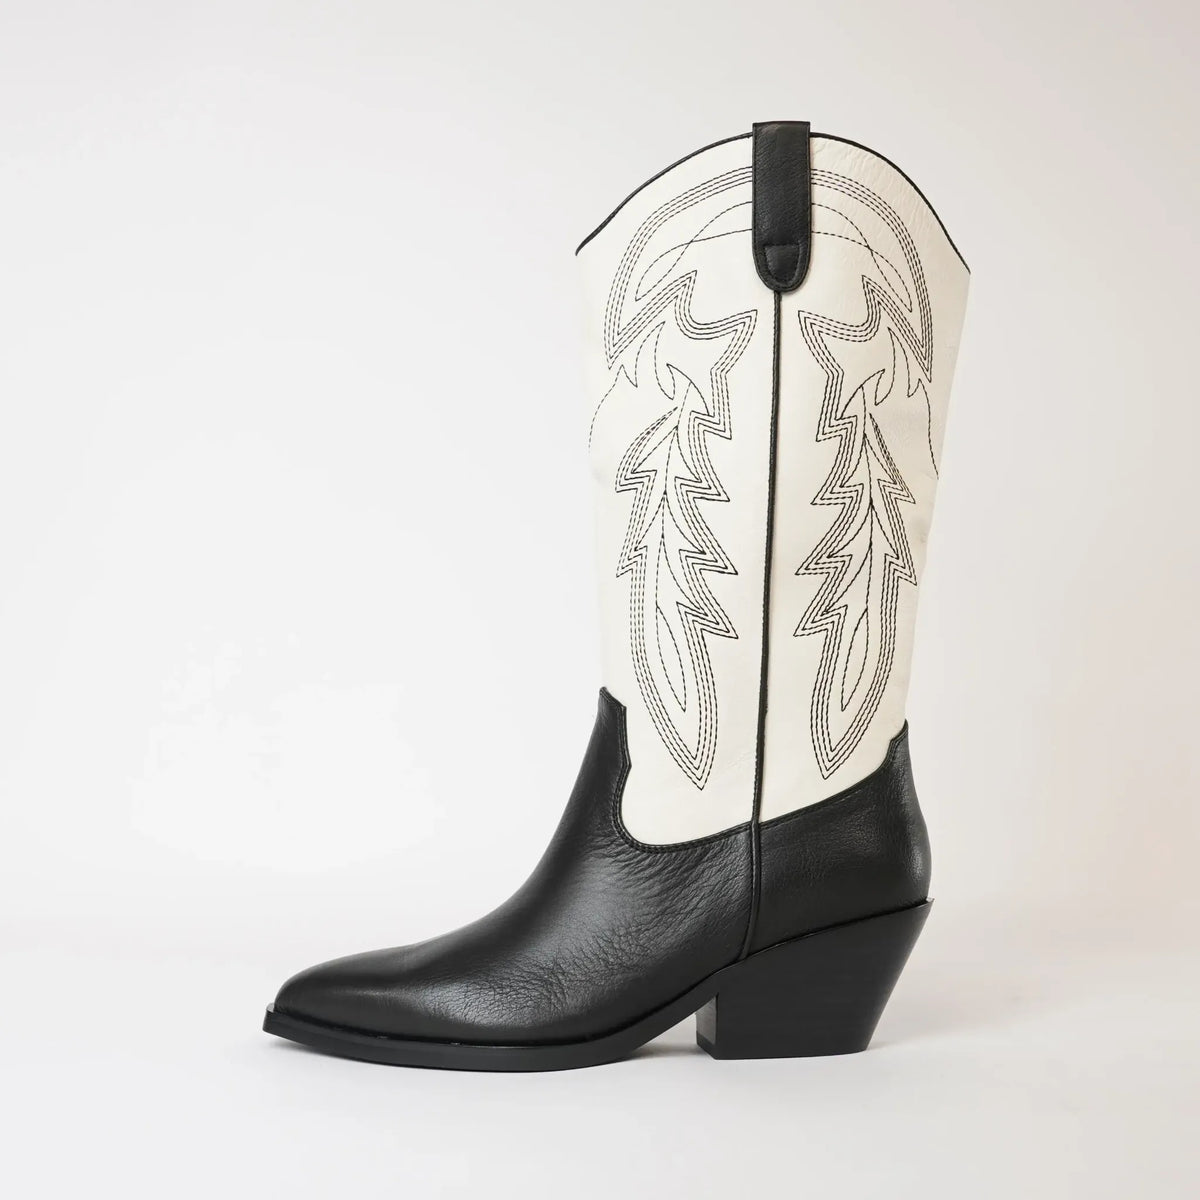 Riding Black / Cream Leather Embroidery Knee High Boots